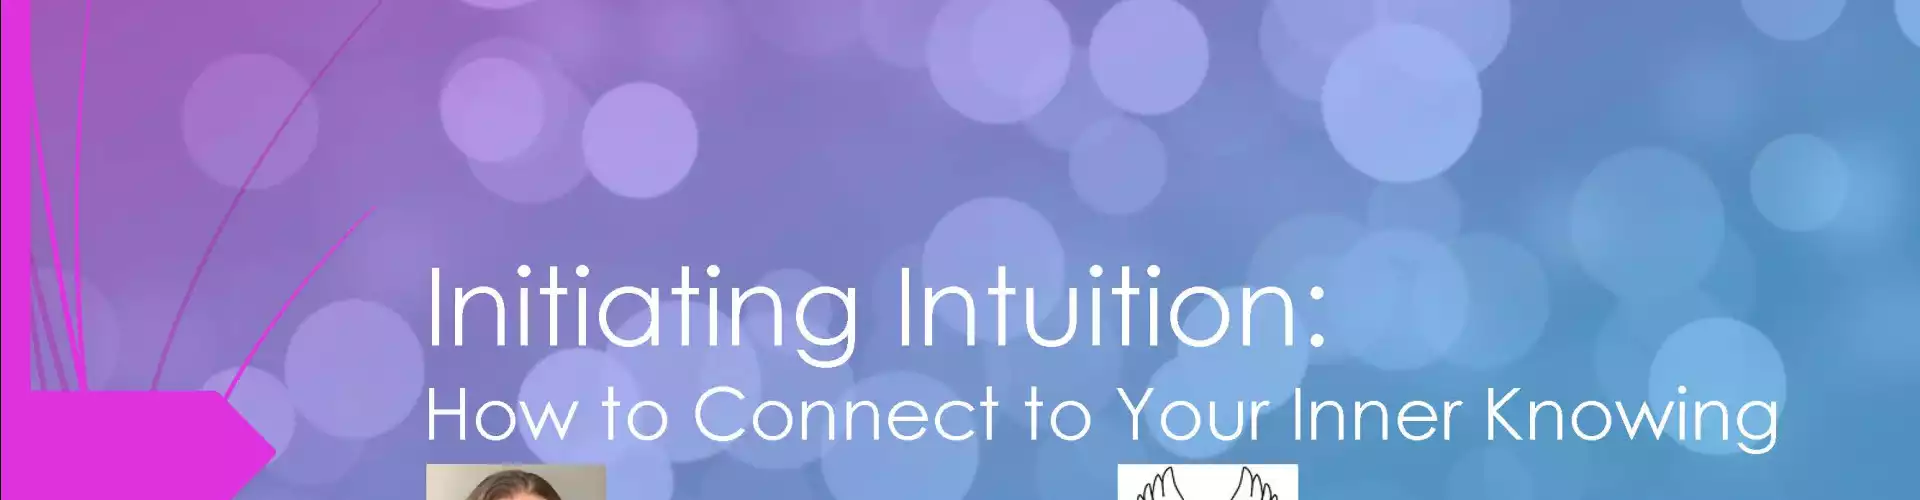 Initiating Intuition: How to Connect to Your Inner Knowing